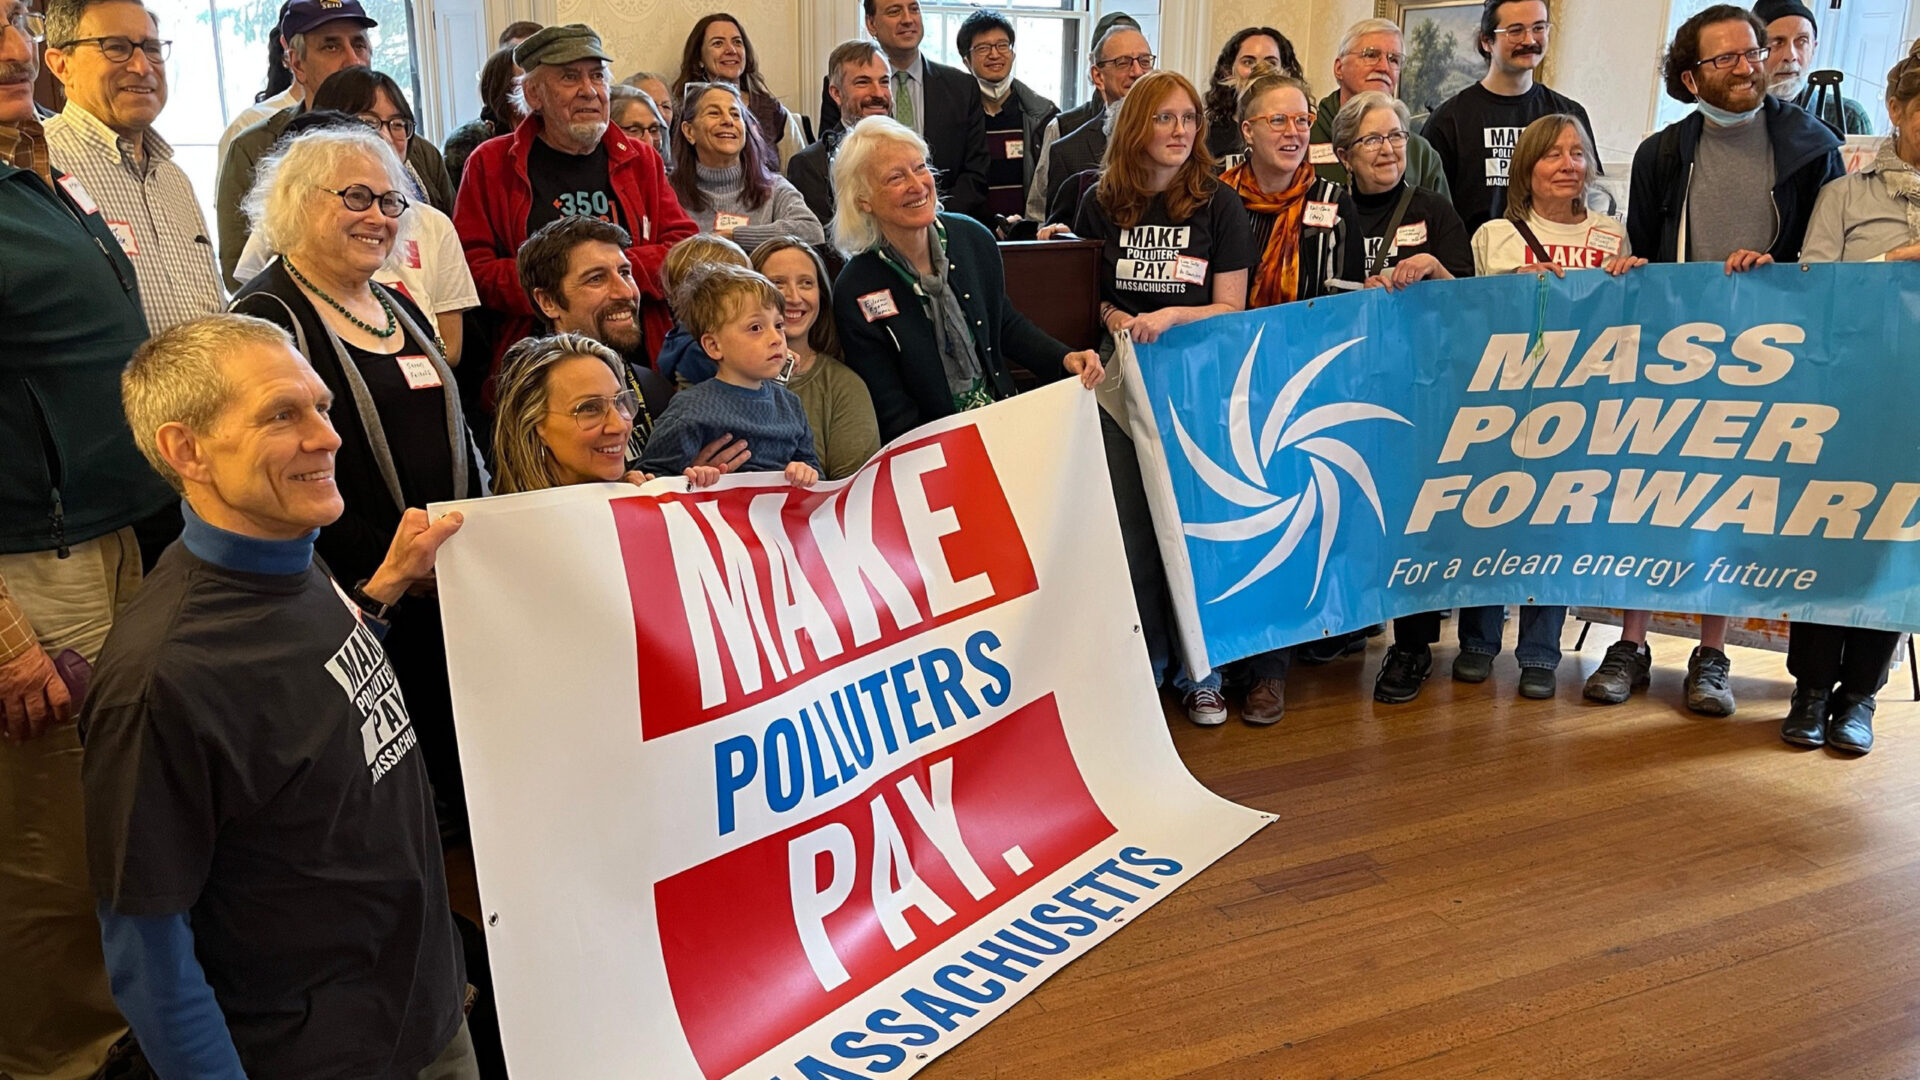 Lawmakers & Activists Hope to “Make Polluters Pay” During Kickoff Event at Watertown Arsenal